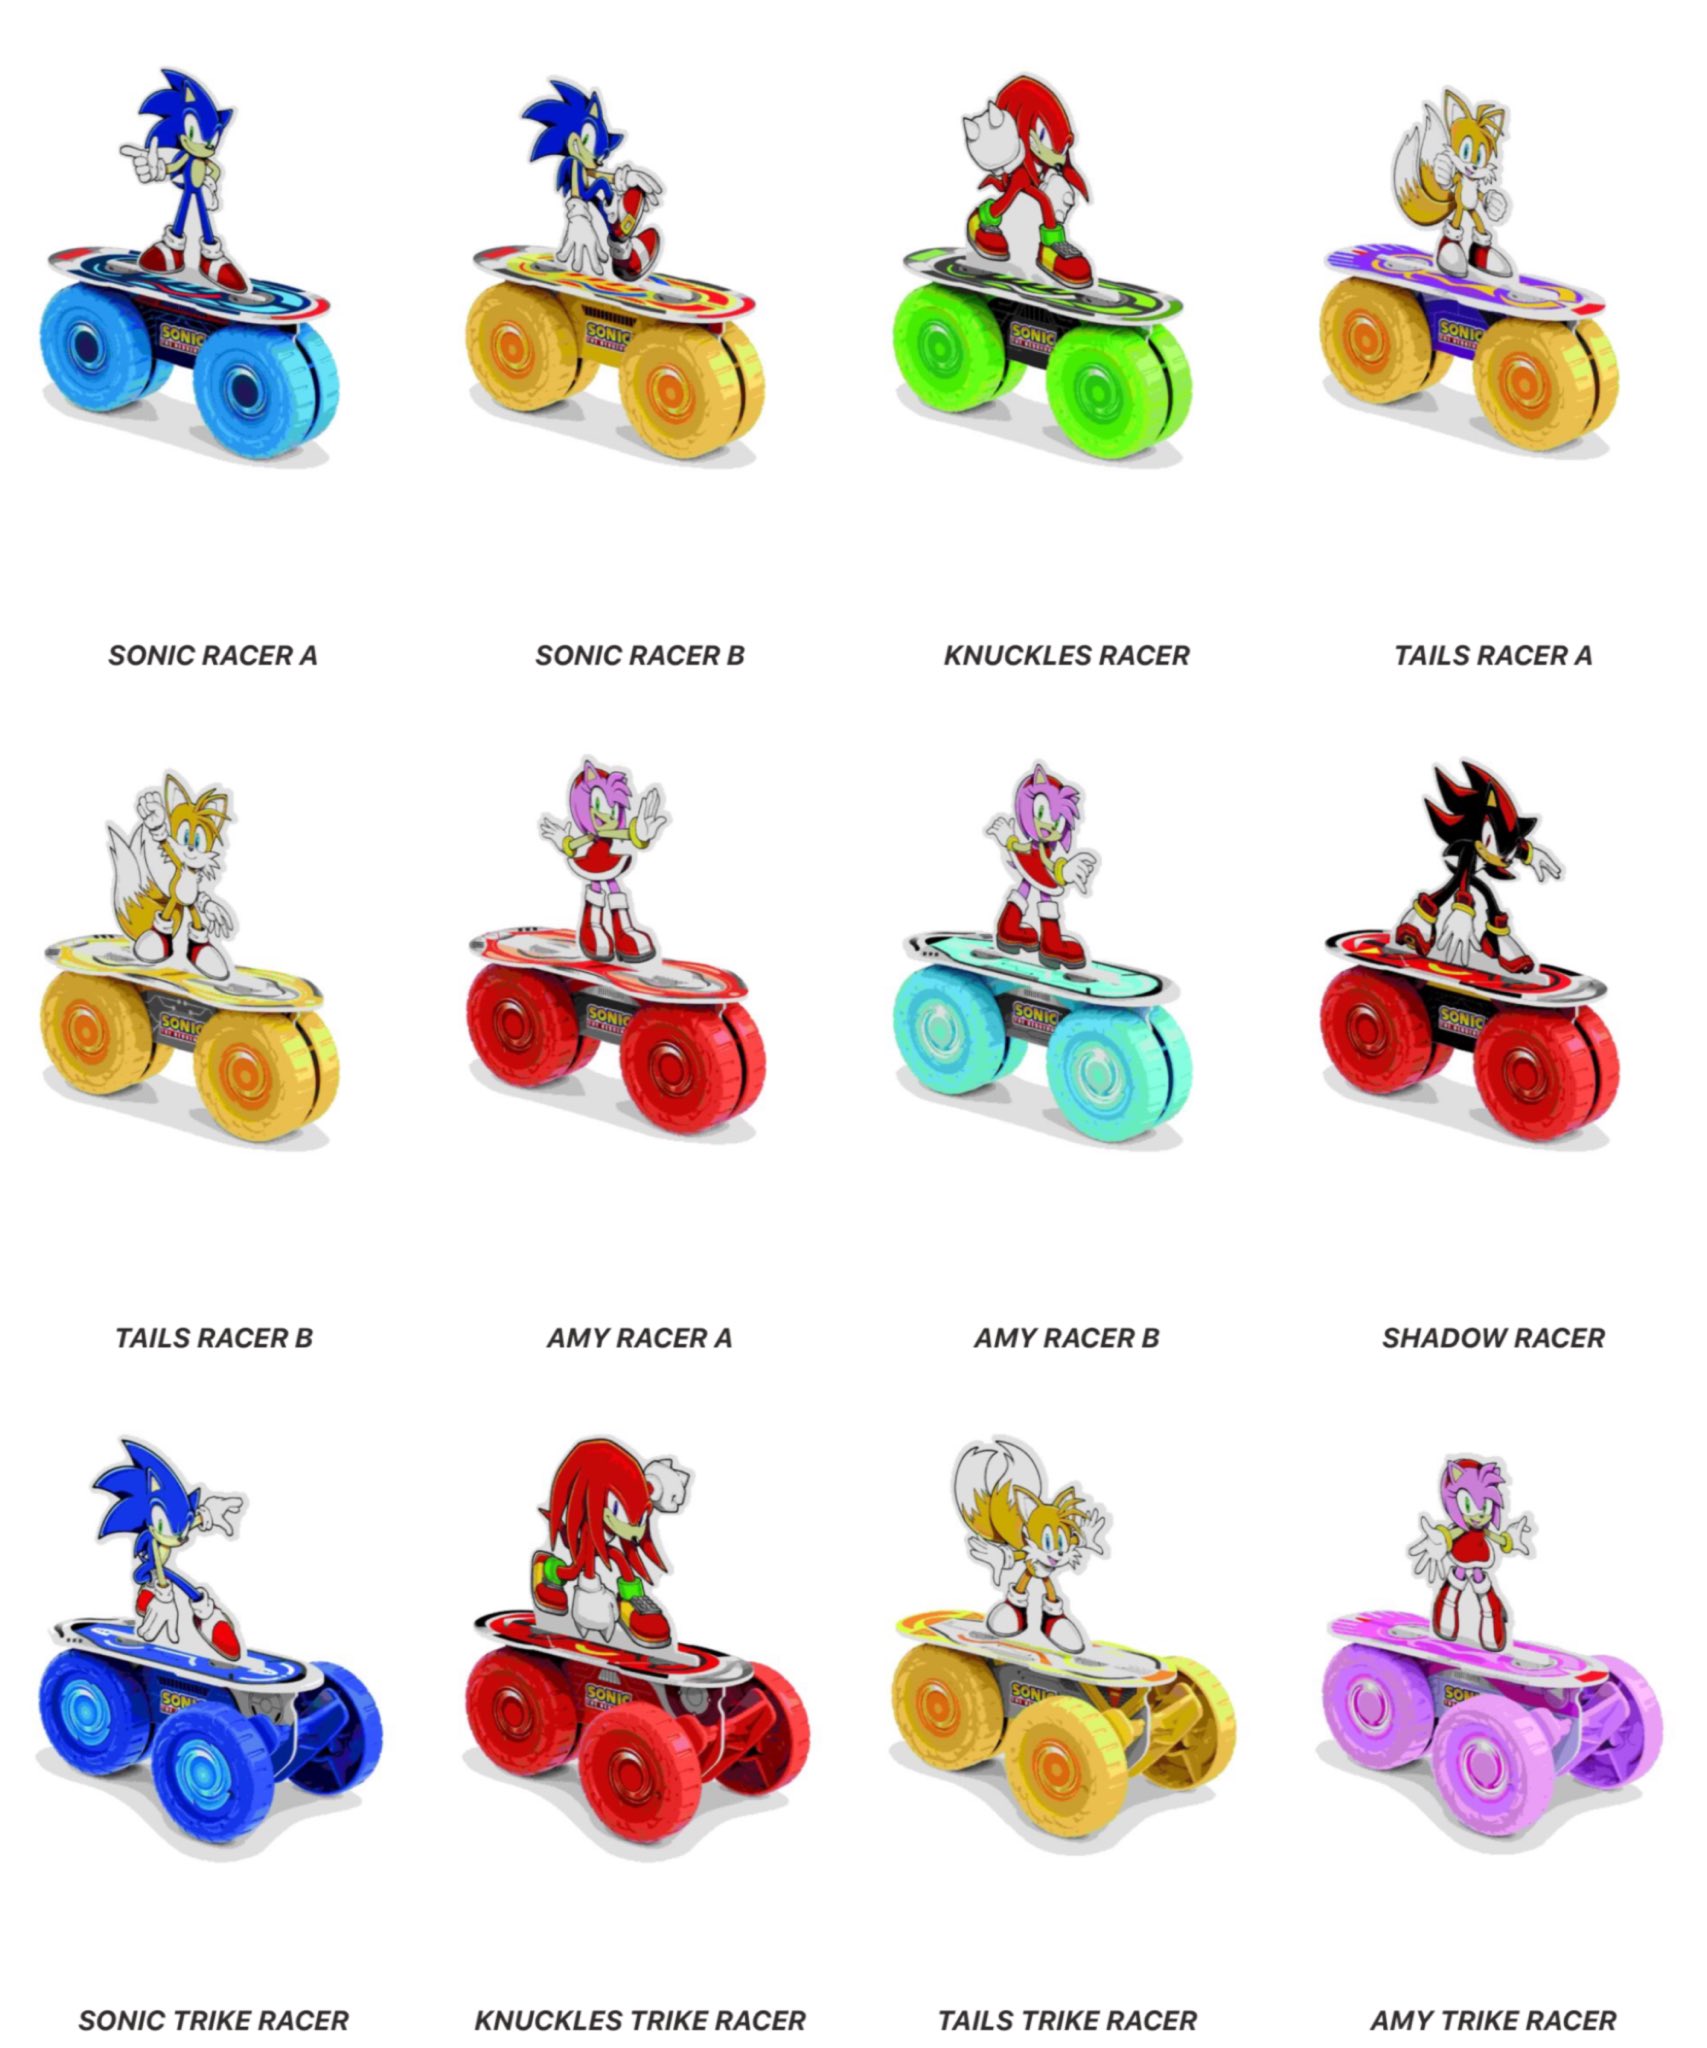 Tails' Channel, celebrating 15 years on X: ✨ In case you missed it:  @Toyworldmag published a new #SonicPrime licencing ad featuring the  upcoming line up of merch from toy manufacturer PMI. A